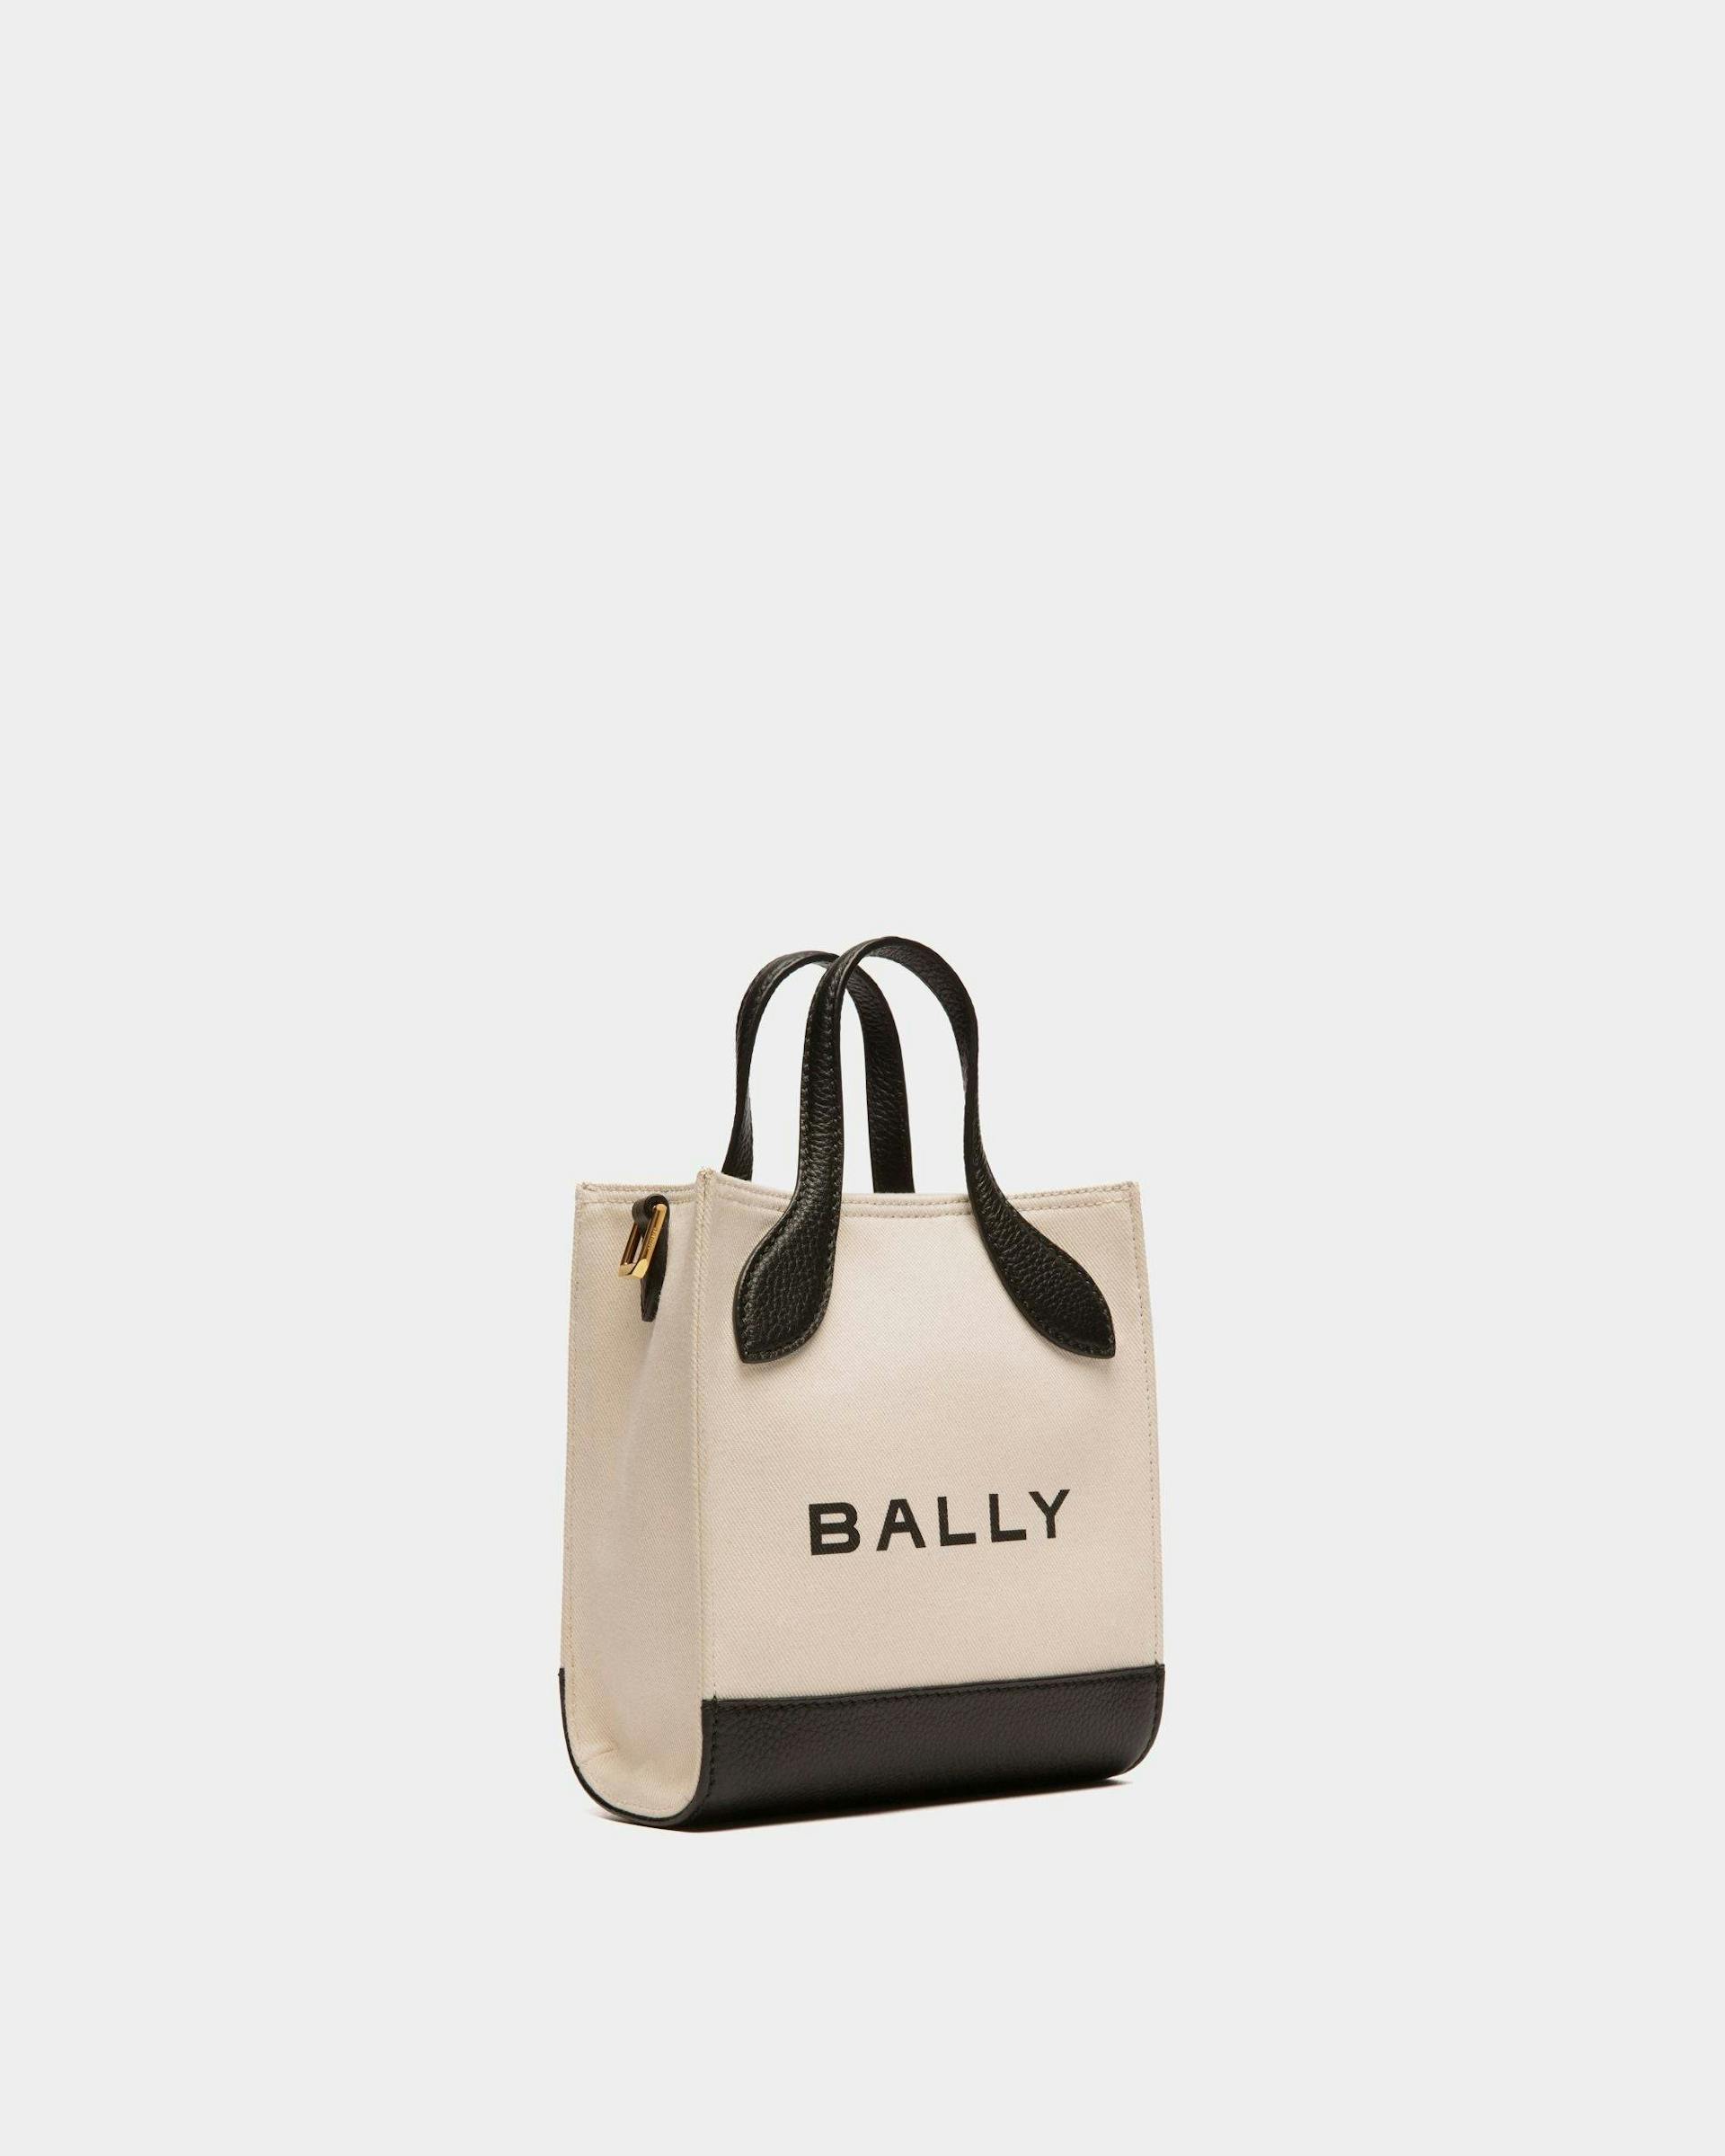 Women's Bar Mini Tote Bag in Neutral And Black Canvas And Leather | Bally | Still Life 3/4 Front